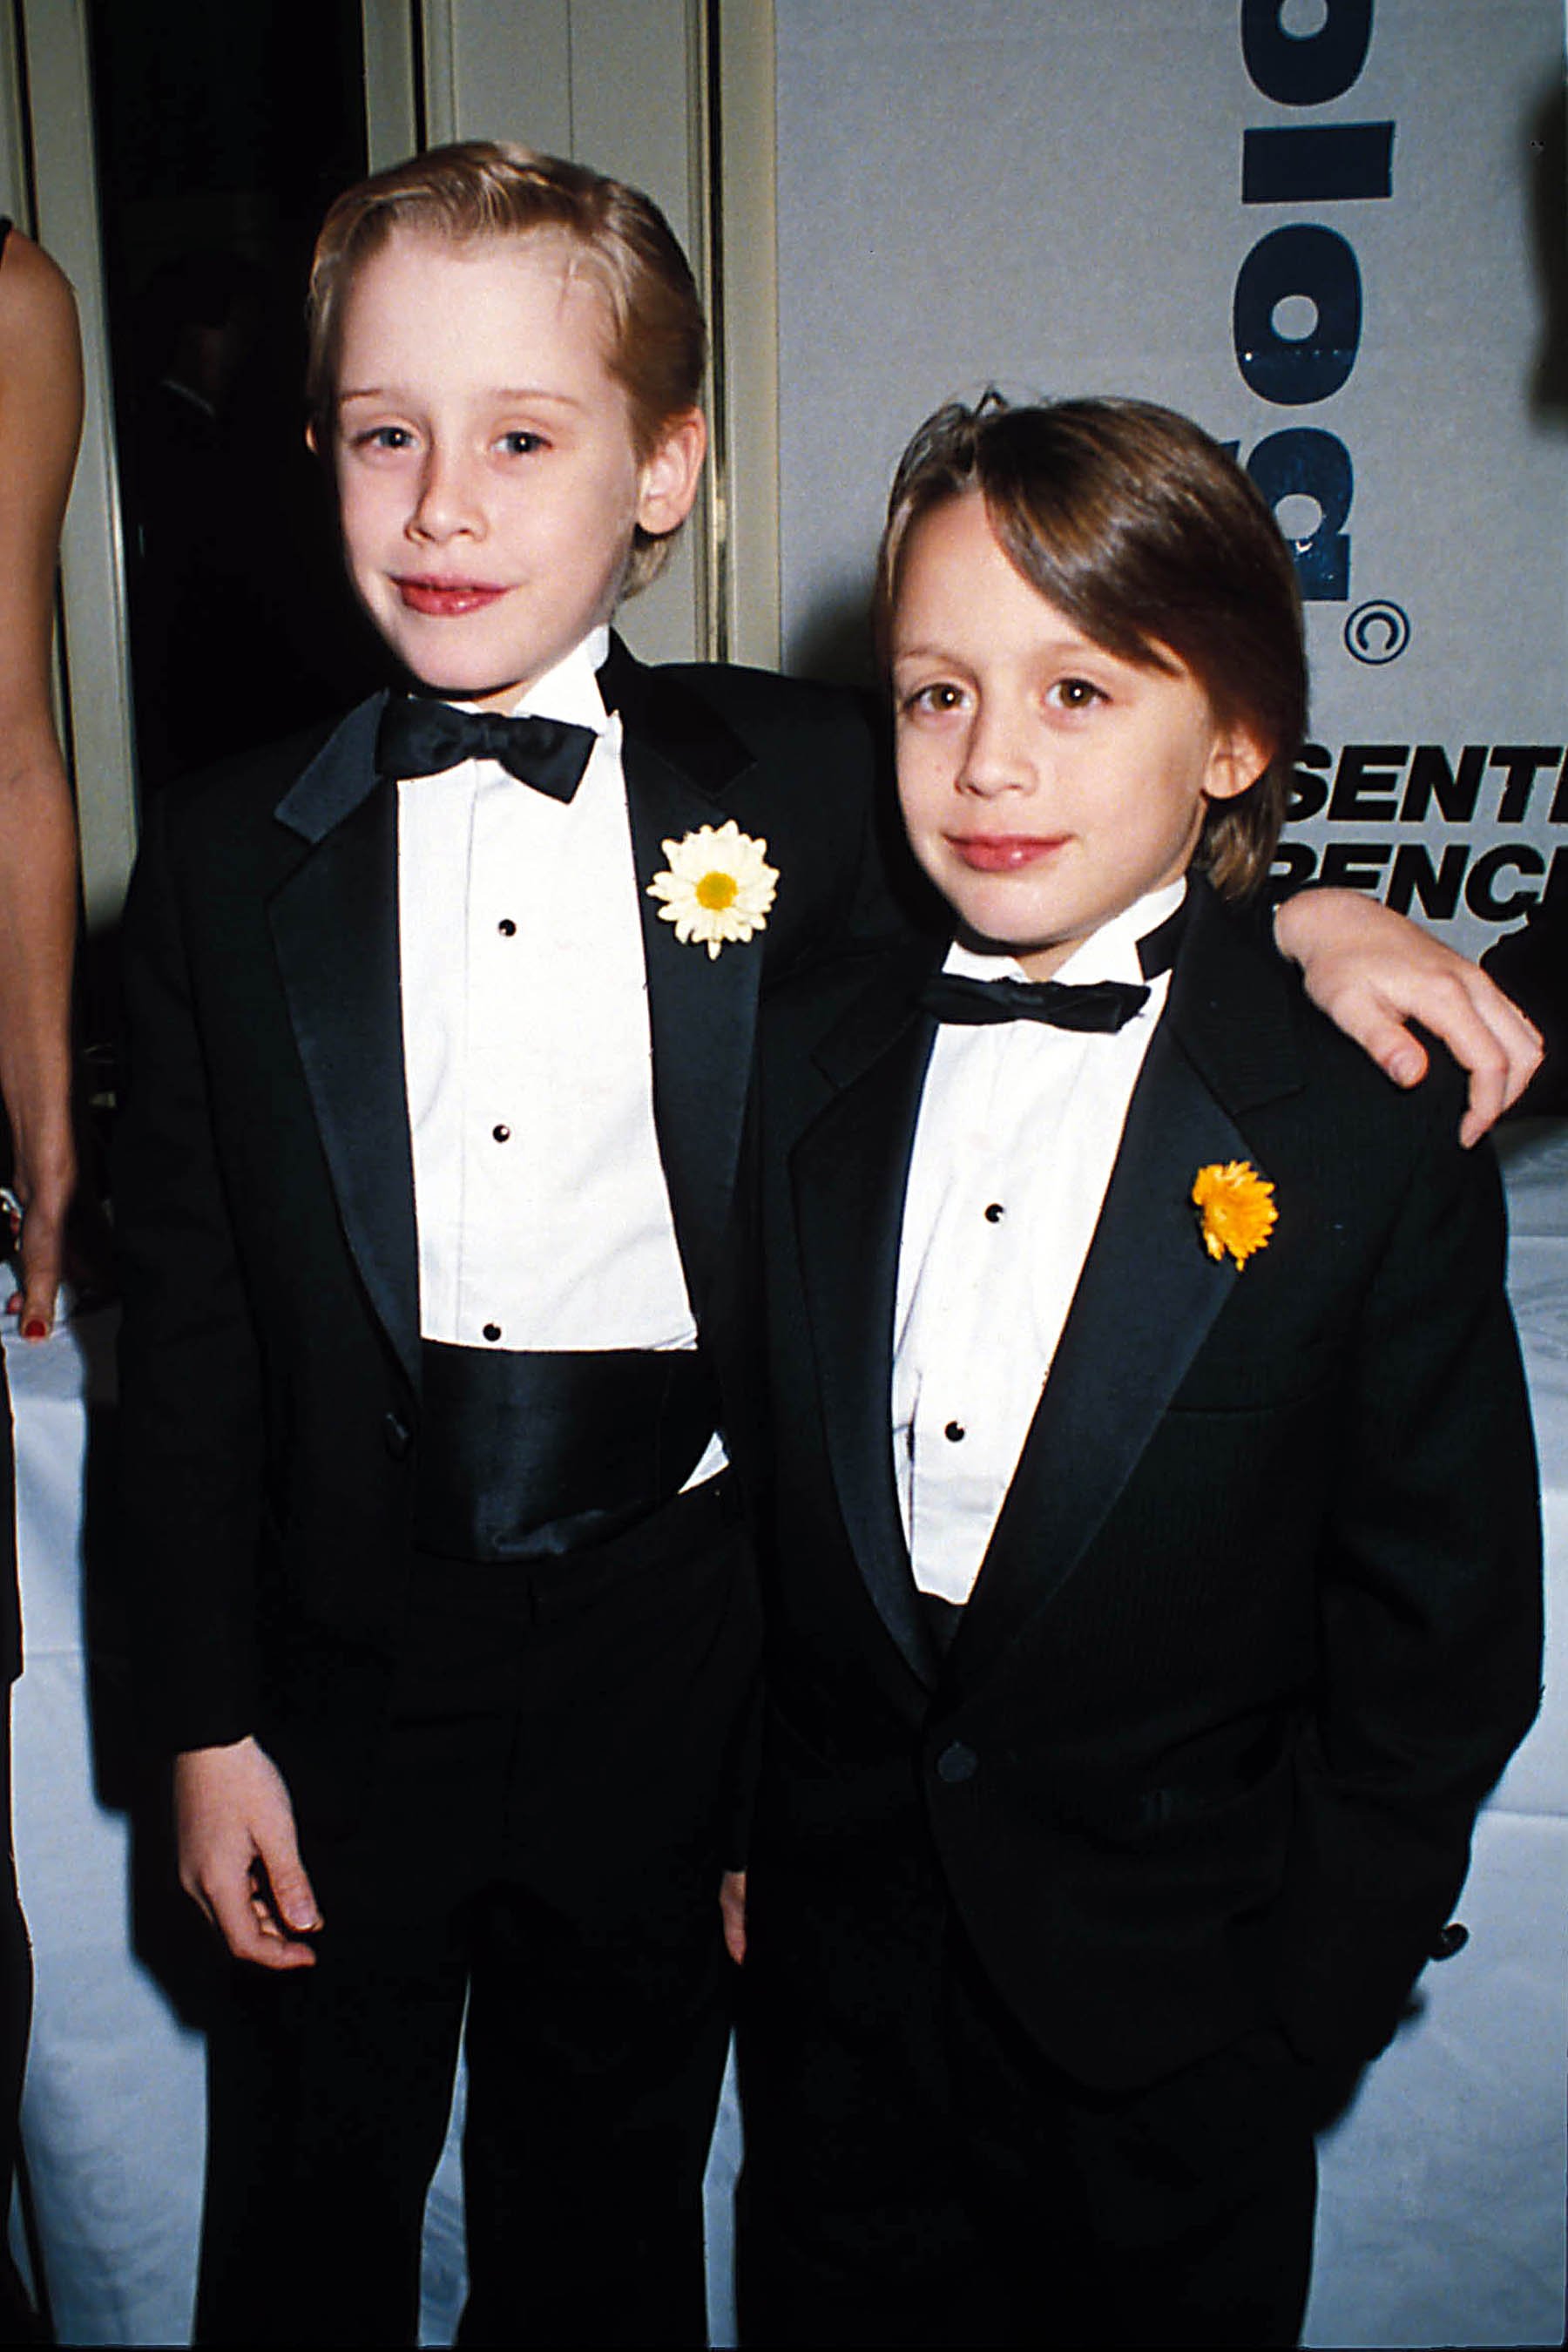 Macaulay Culkin, and his brother Kieran Culkin in 1991 | Source: Getty Images